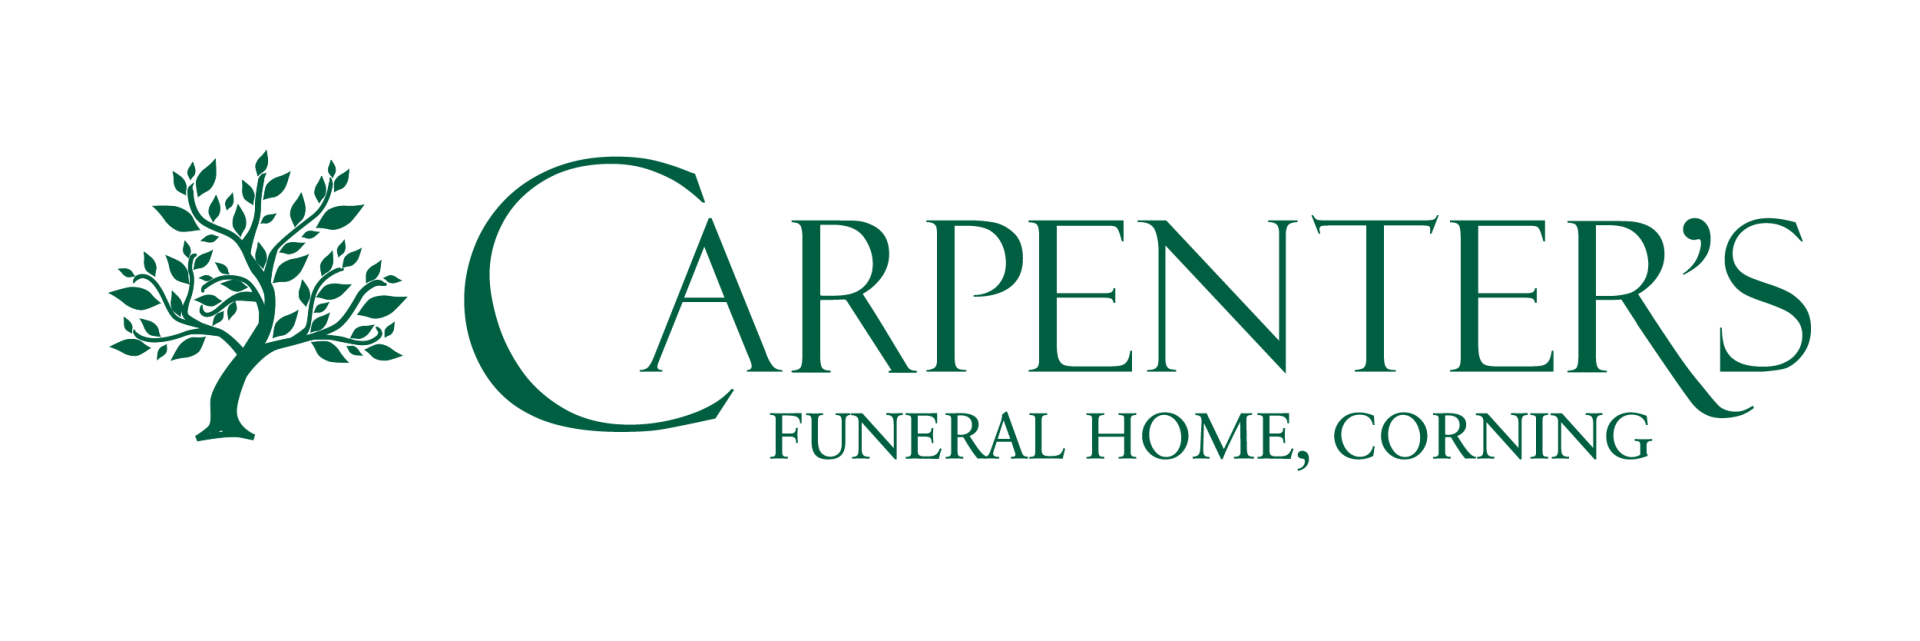 Carpenters Funeral Home, Corning NY